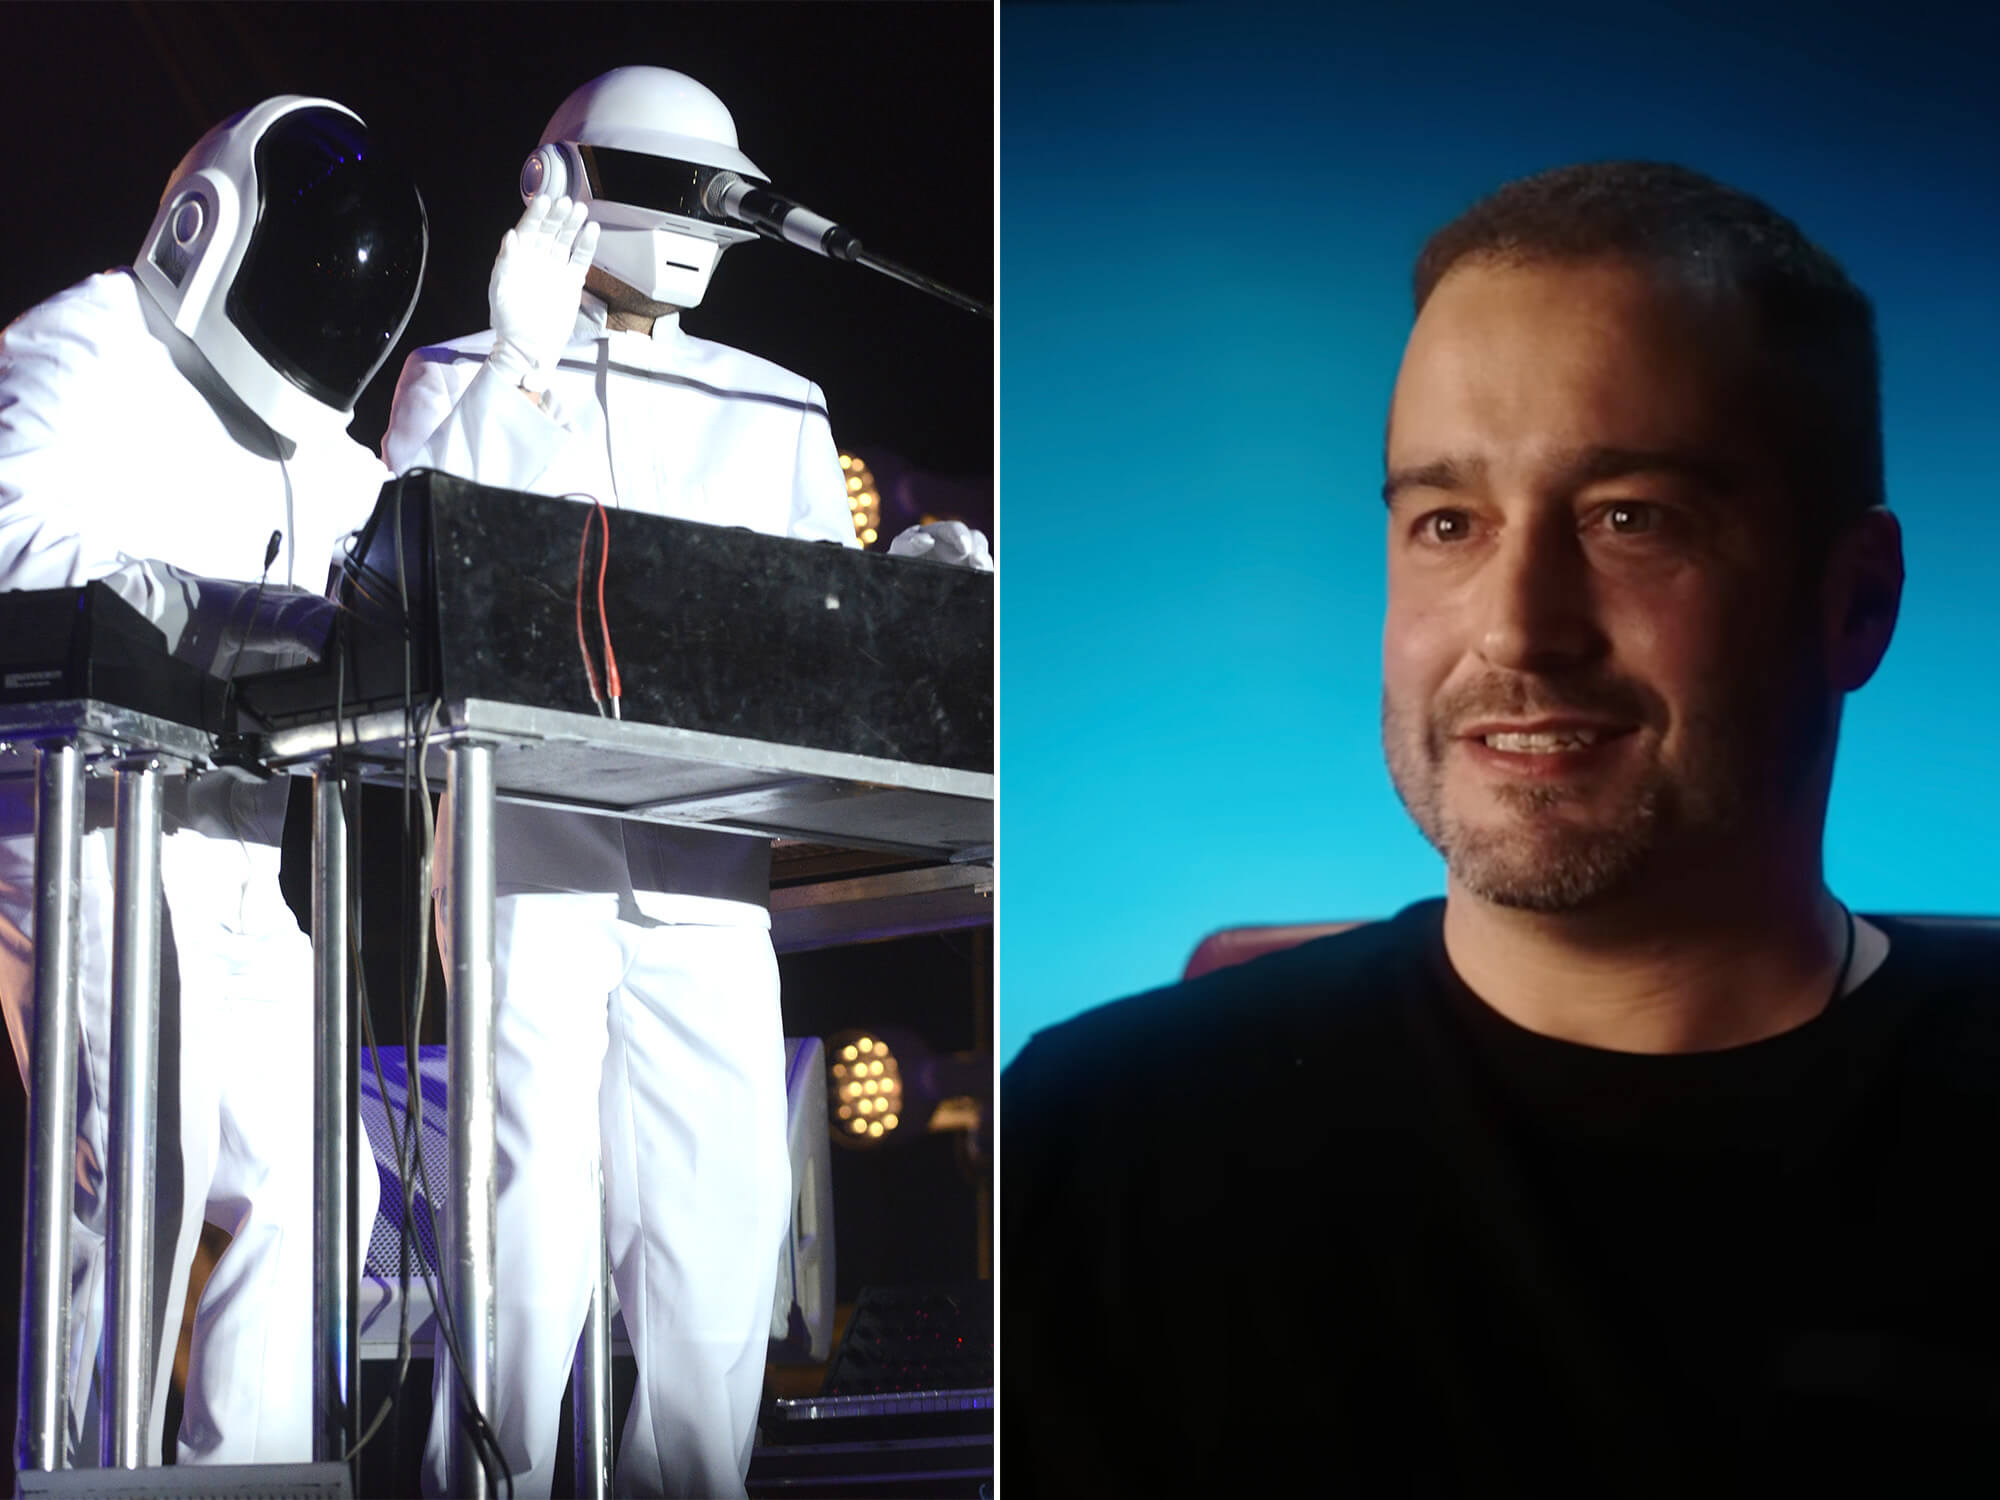 Daft Punk in their signature helmets performing in 2014 (left), Todd Edwards sitting before a blue background and smiling during interview for the Memory Tapes (right)